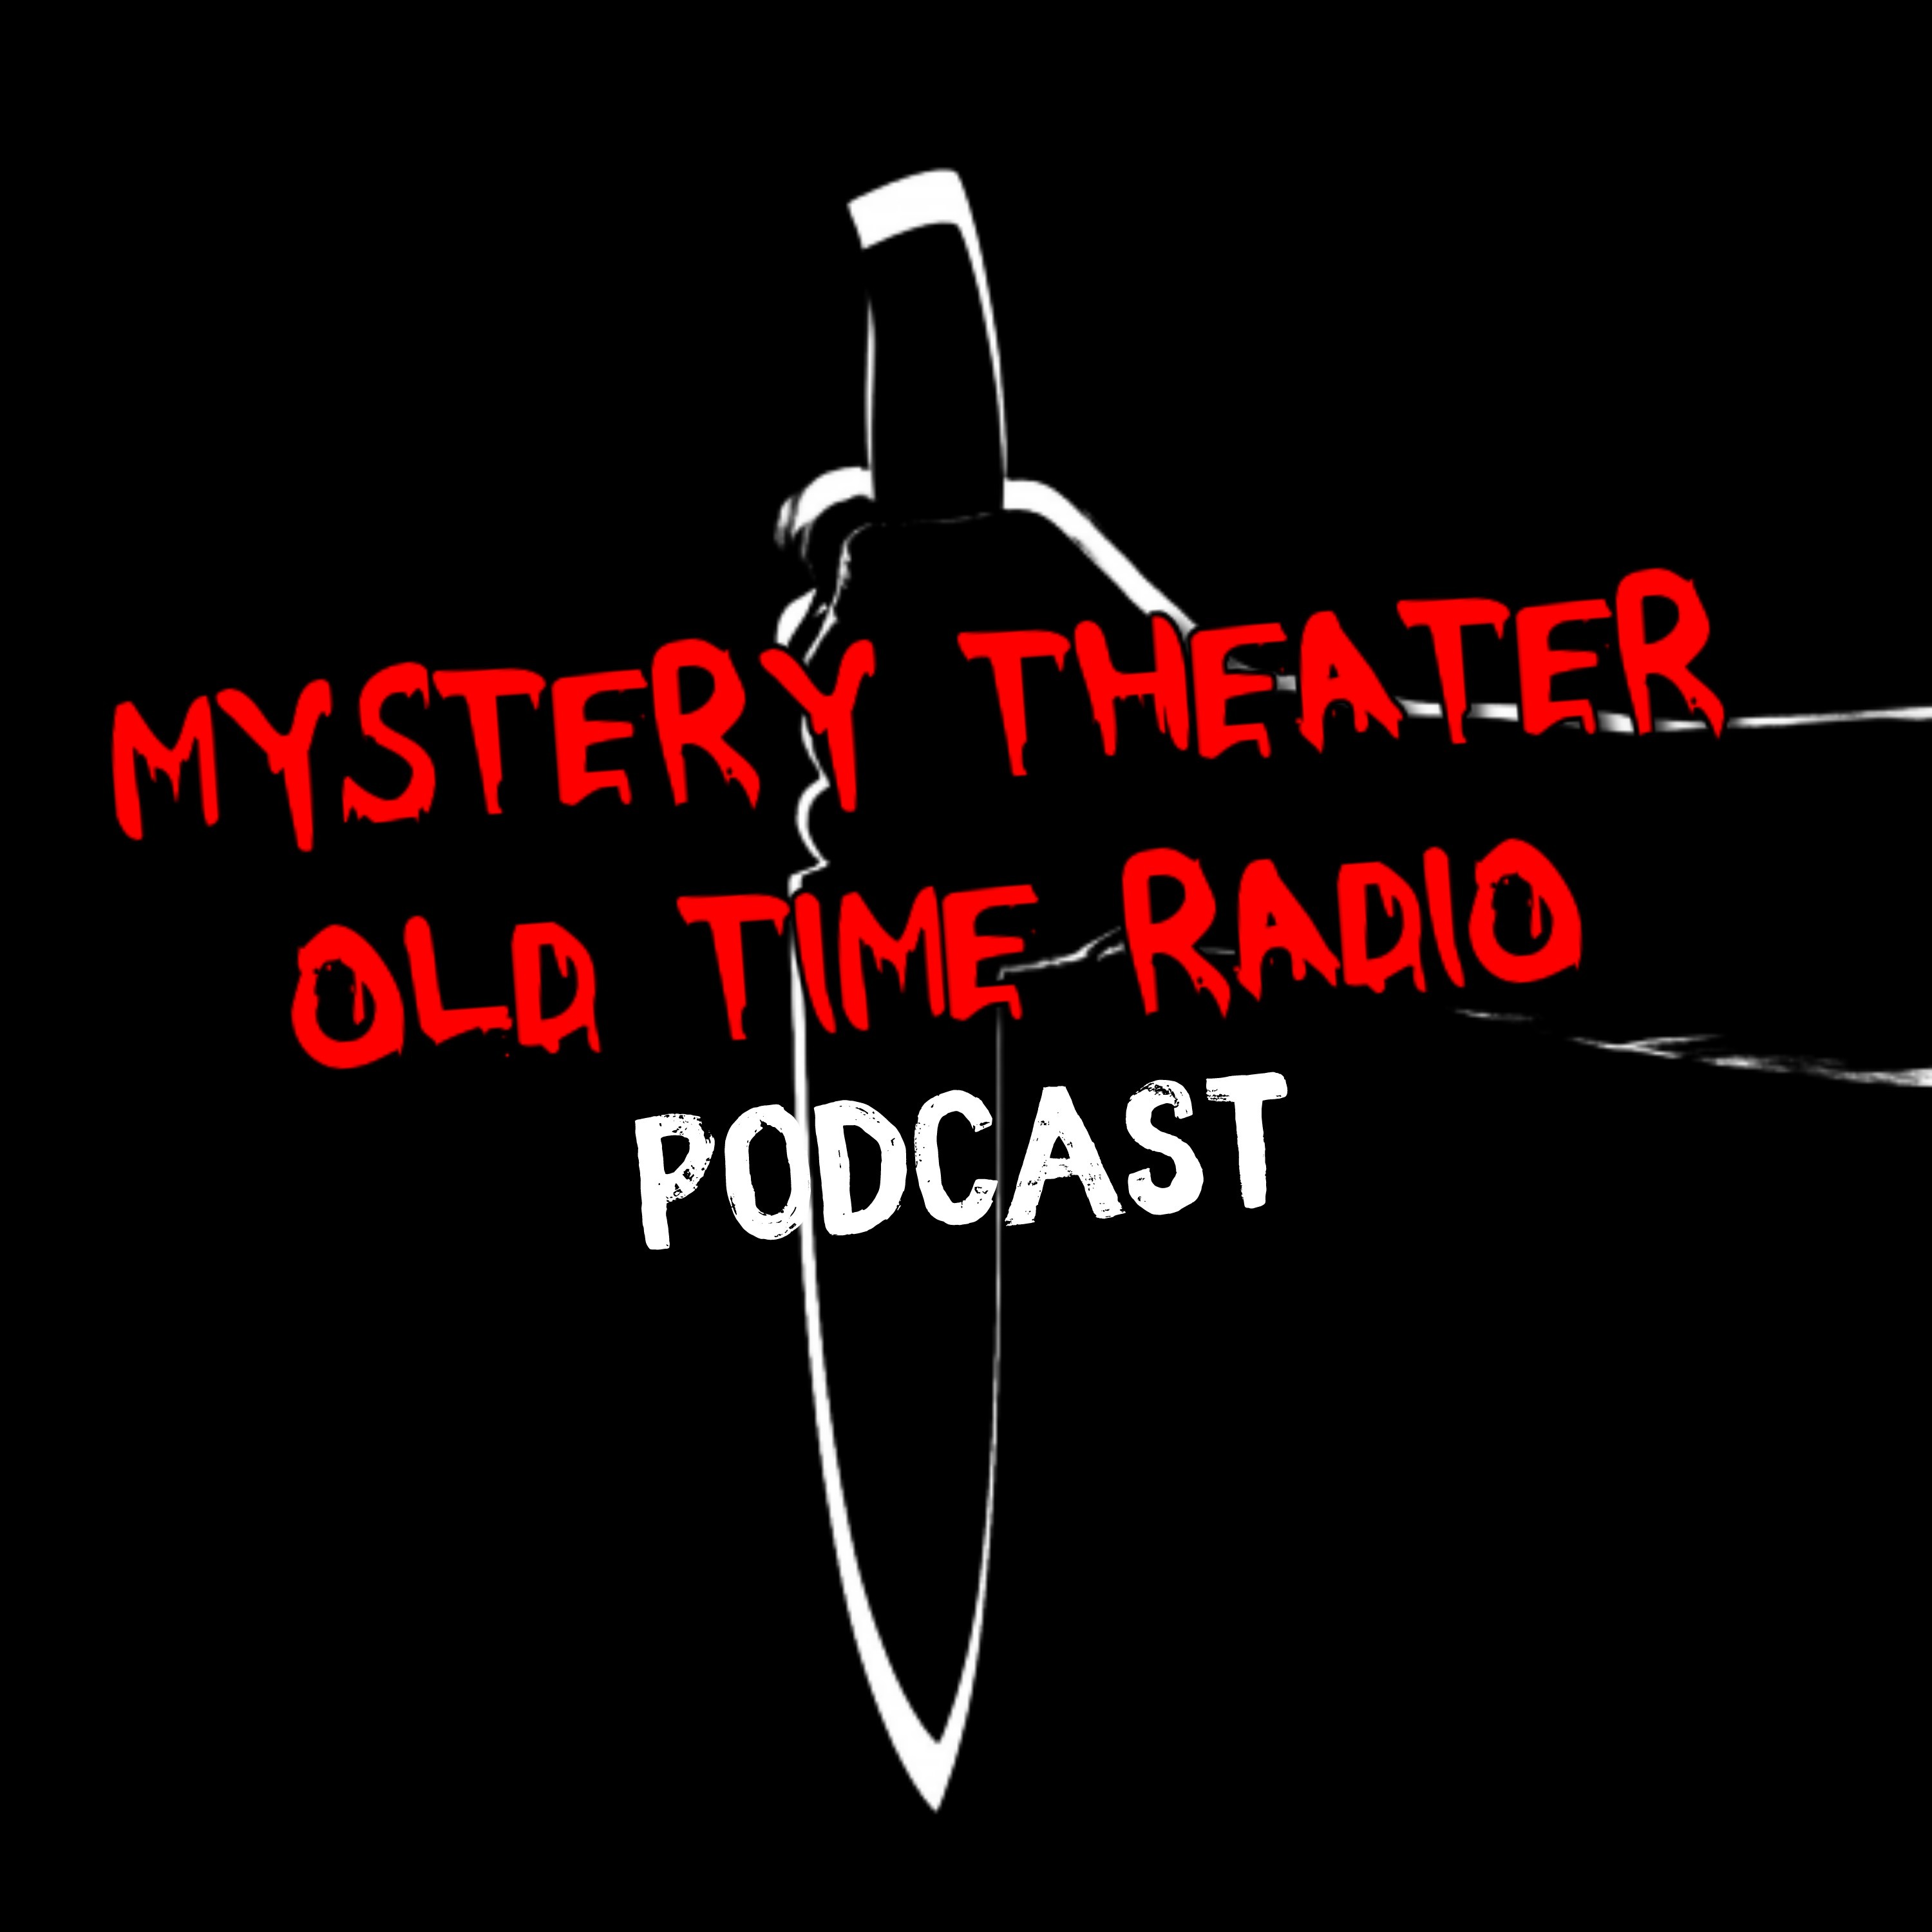 Suspense Radio Shows - Episode #79- - "The Kettler Method" Mystery Theater Old Time Radio Show Podcast